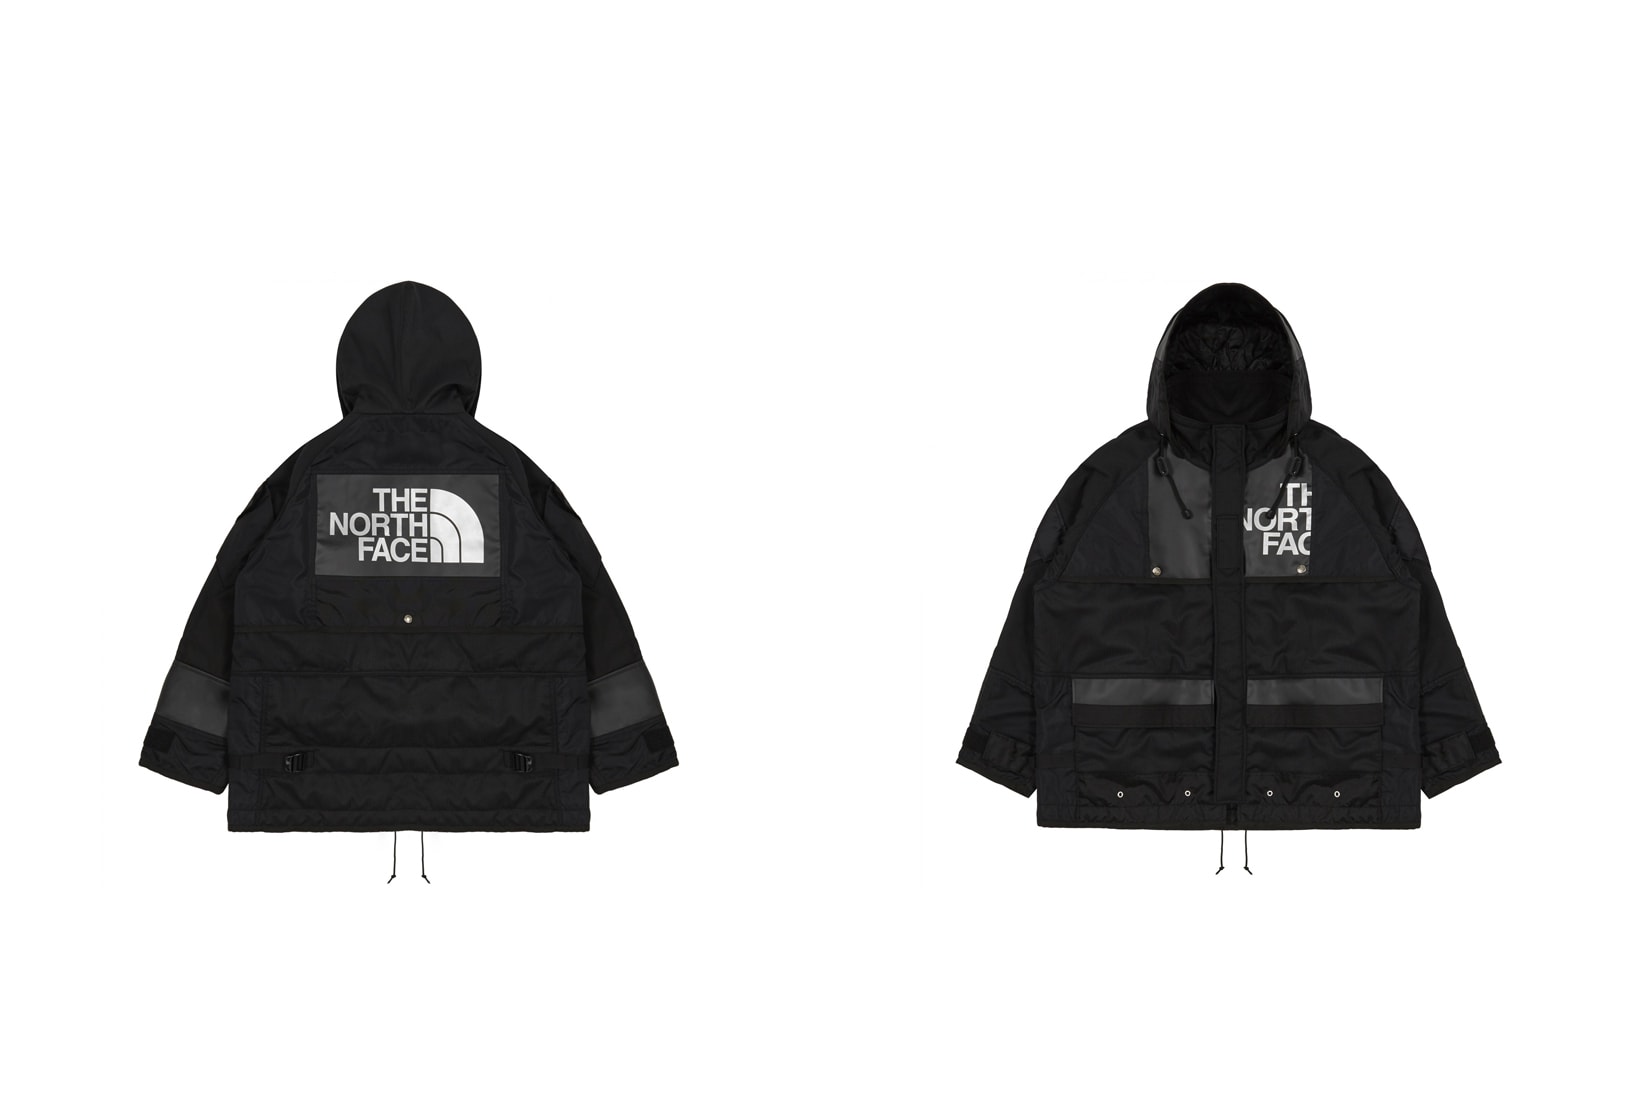 Junya Watanabe MAN The North Face Outerwear Apparel Dover Street Market London Fashion Clothing